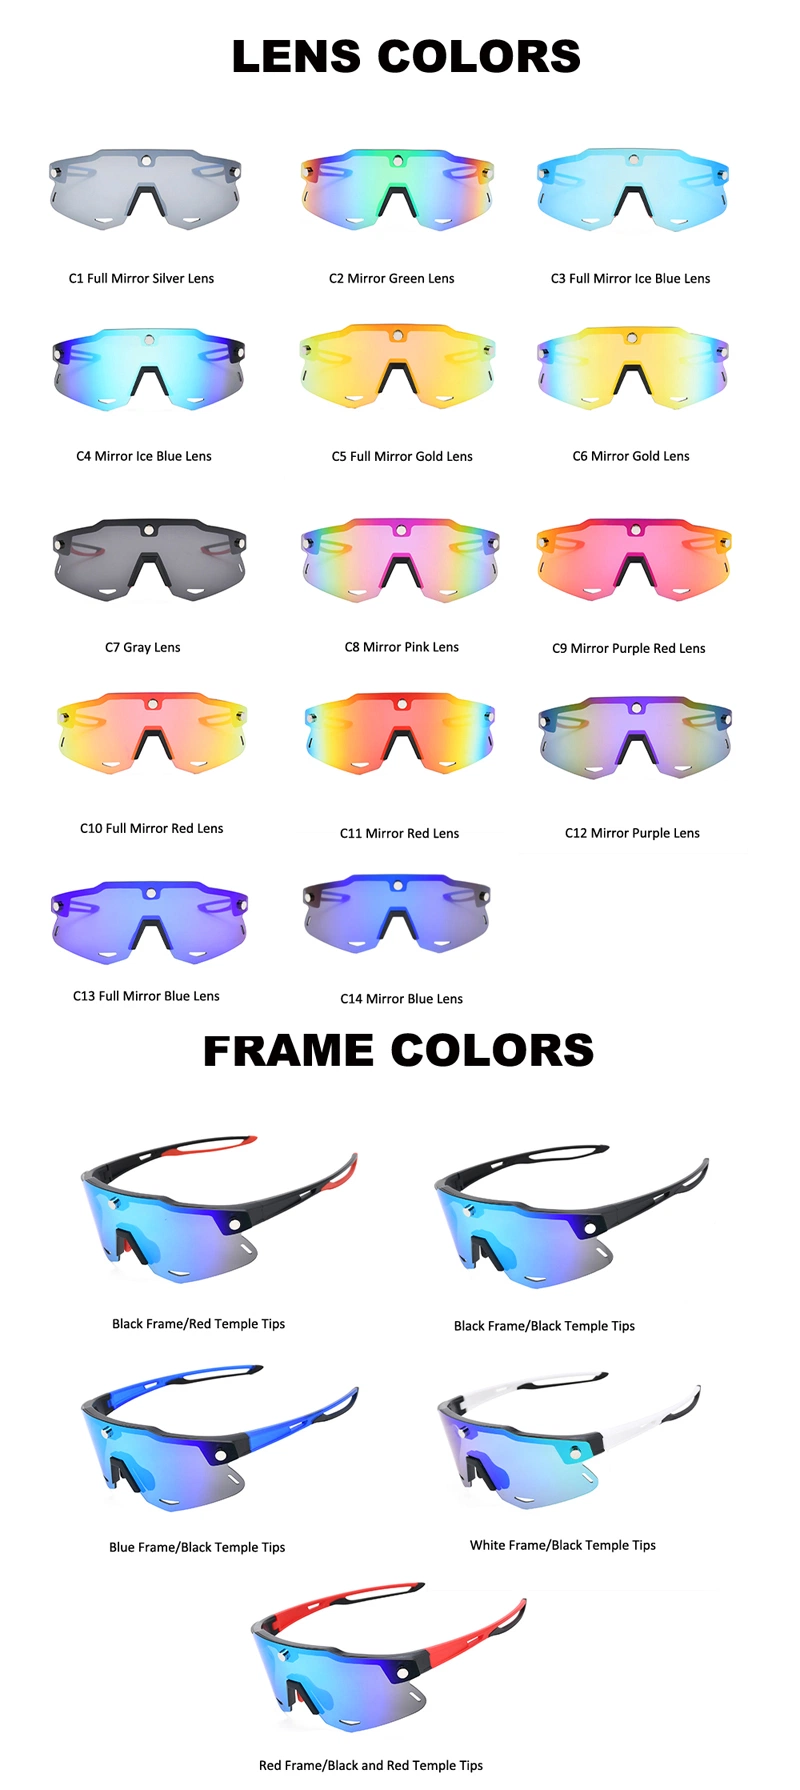 Magnetic Sports Sunglasses Eyewear with Strap Interchangeable Lens Polarized Photochromic Bicycle Mountain Bike Glasses